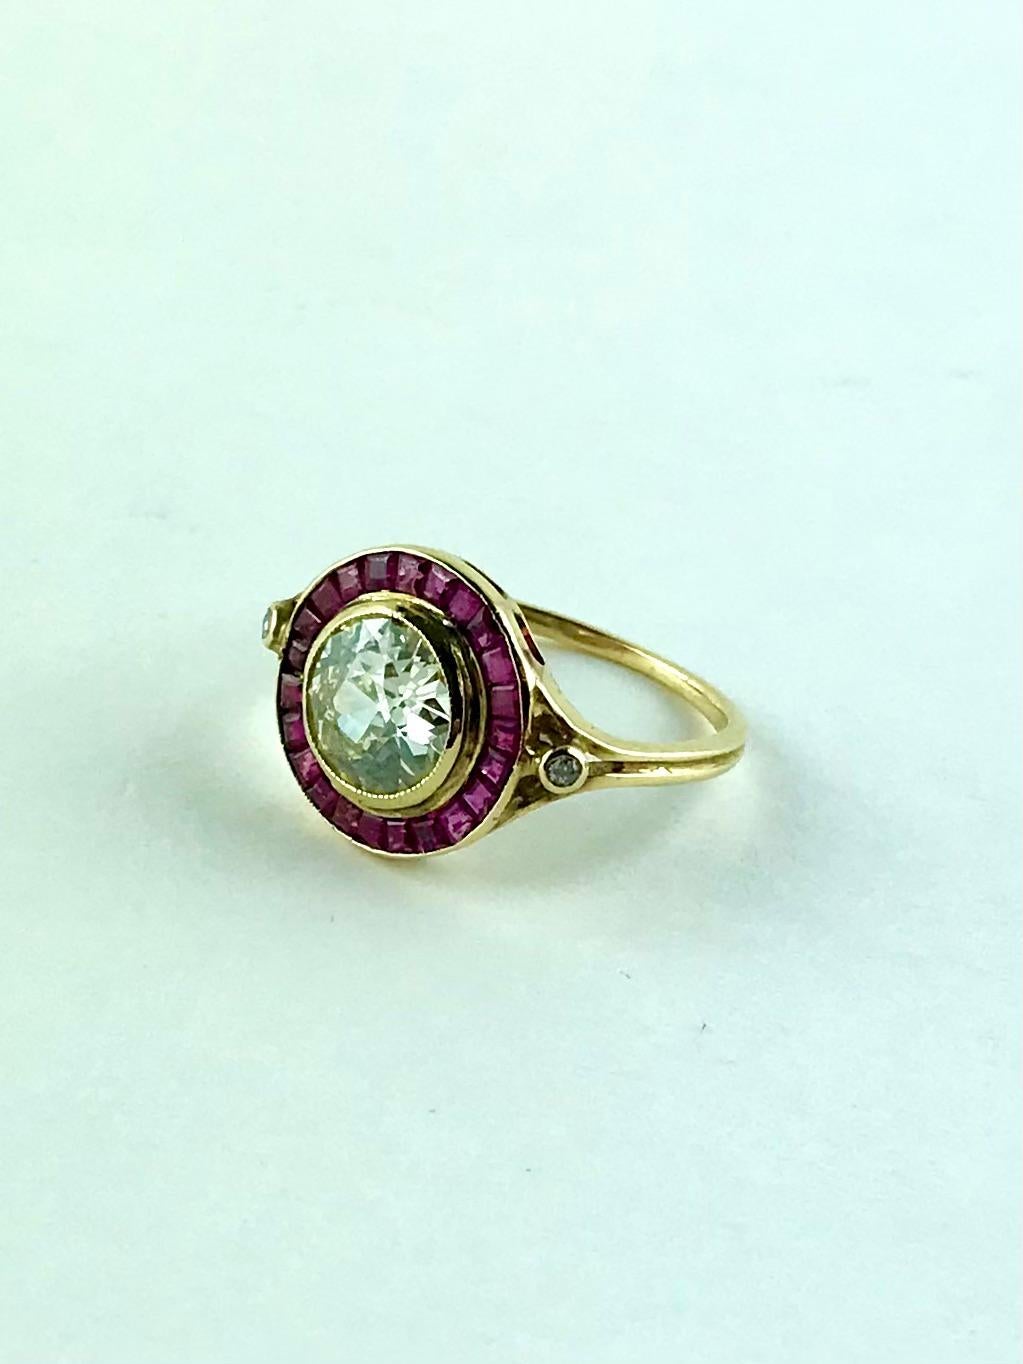 This extremely chic 1920s 18K Yellow Gold  Ring , centers a sparkling old cut Diamond that weighs approx 1.60 cts. Accentuating the center stone are 23 carré and carré calibré cut Rubies to provide the perfect contrast and laterally complemented